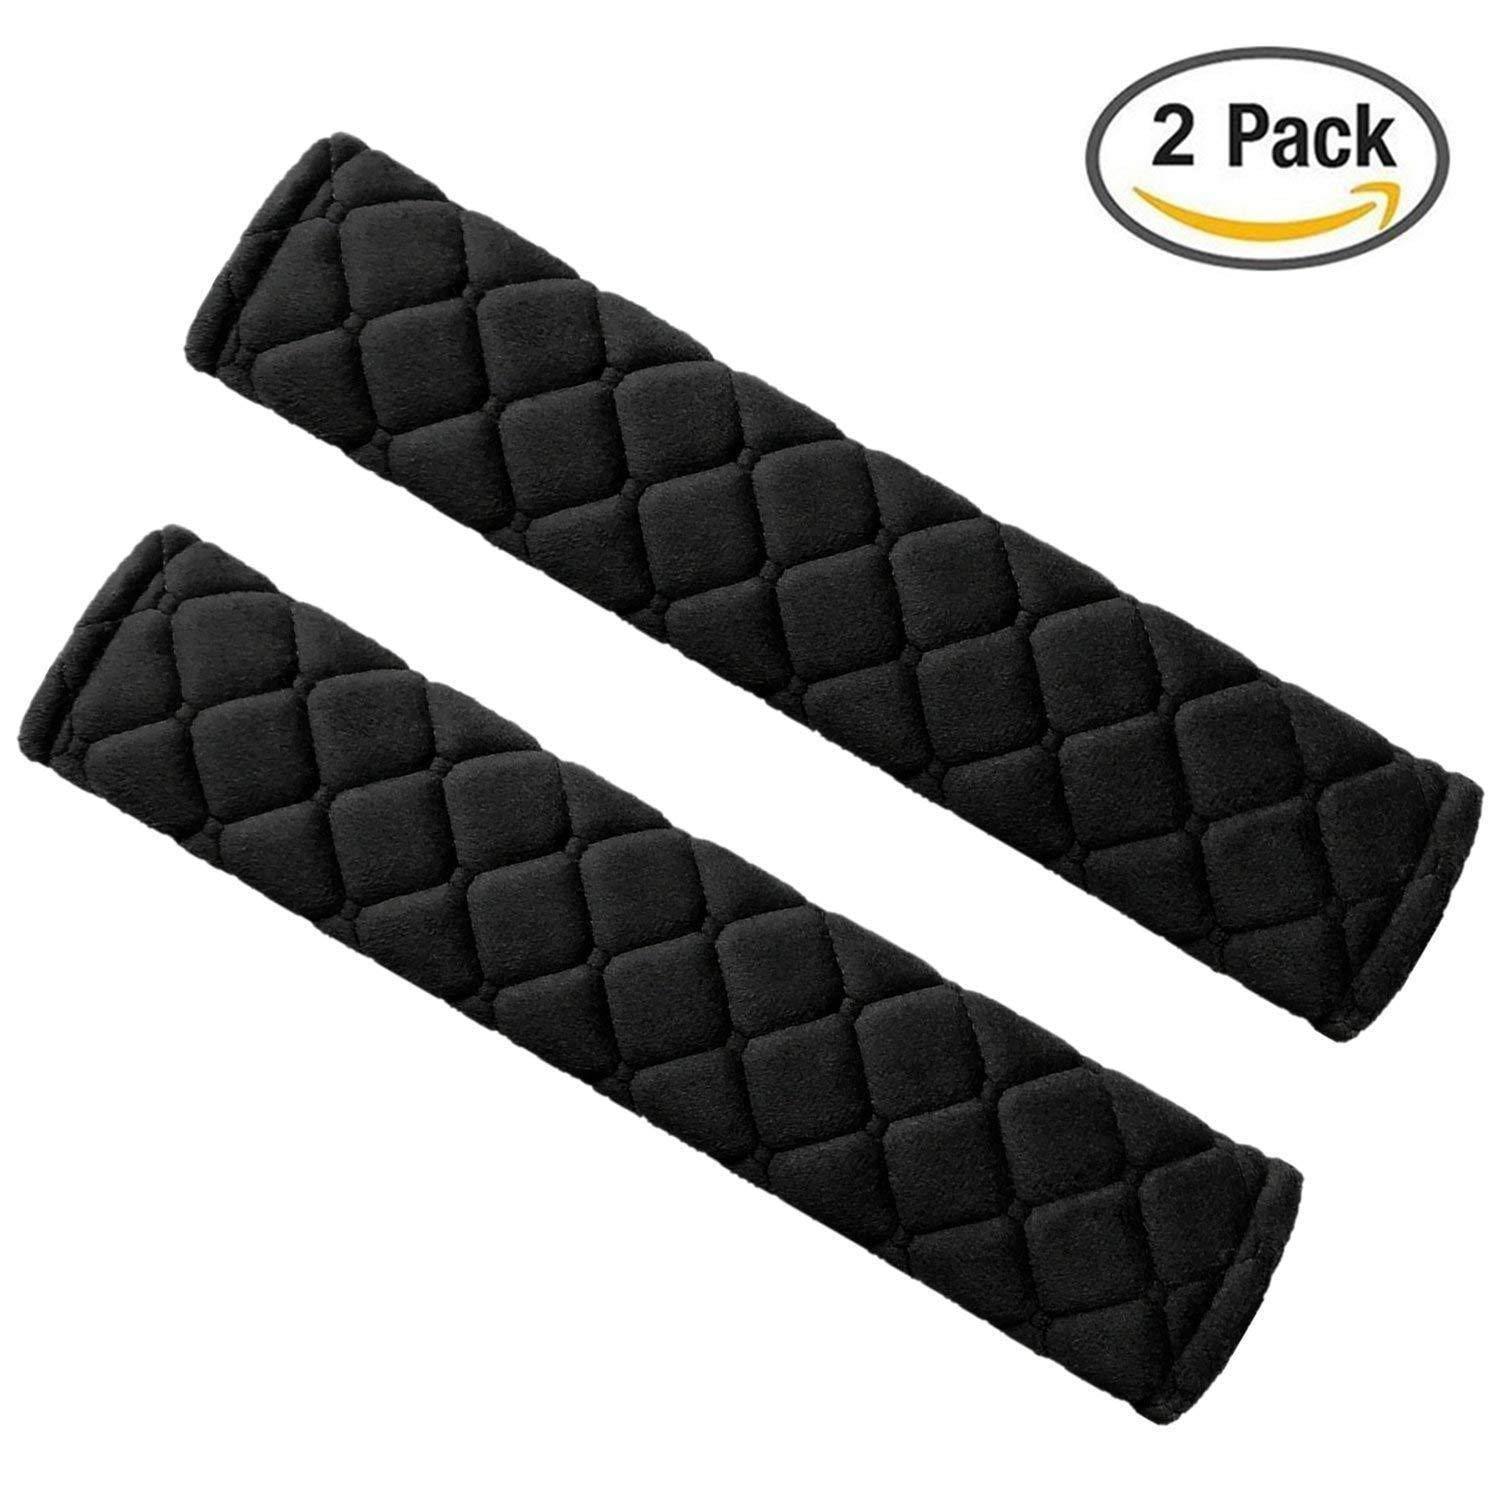 Car Seat Belt Pads Seatbelt Protector Seat Belt Shoulder Strap Covers Car-Styling Seat Belt Cover Auto Universal Case For Toyota Yaris Verso Prado Prius Auris Hilux Supra Camry RAV4 Accessories Color